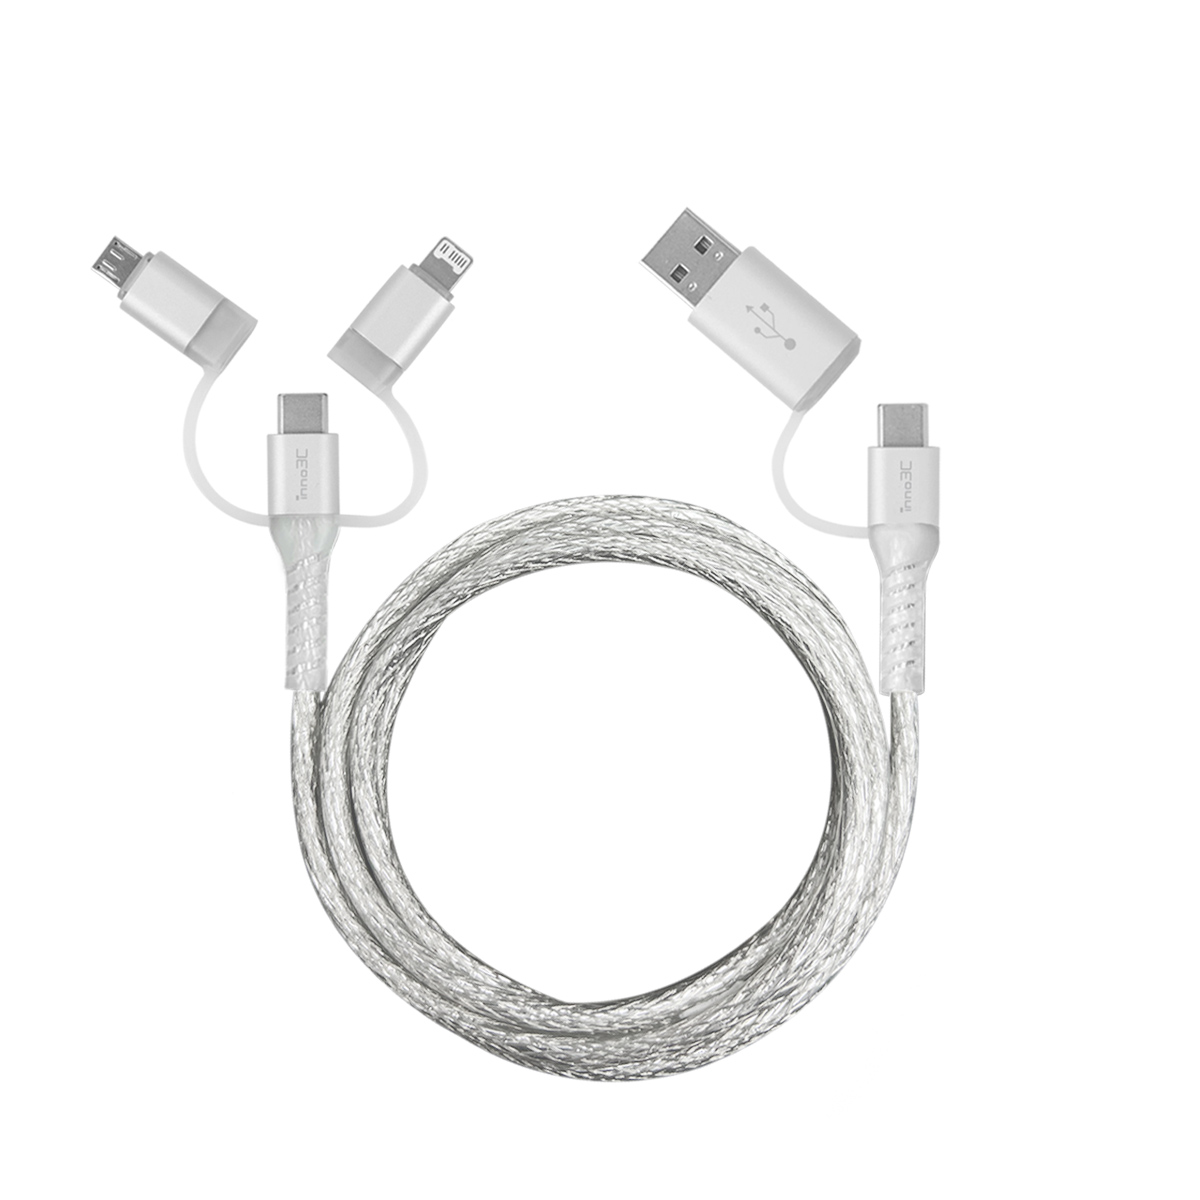 inno3C i-5CS-12  5 in 1 Lightning/Type-C/Micro toUSB/Type-C Cable (Transparent Silver), , large image number 2